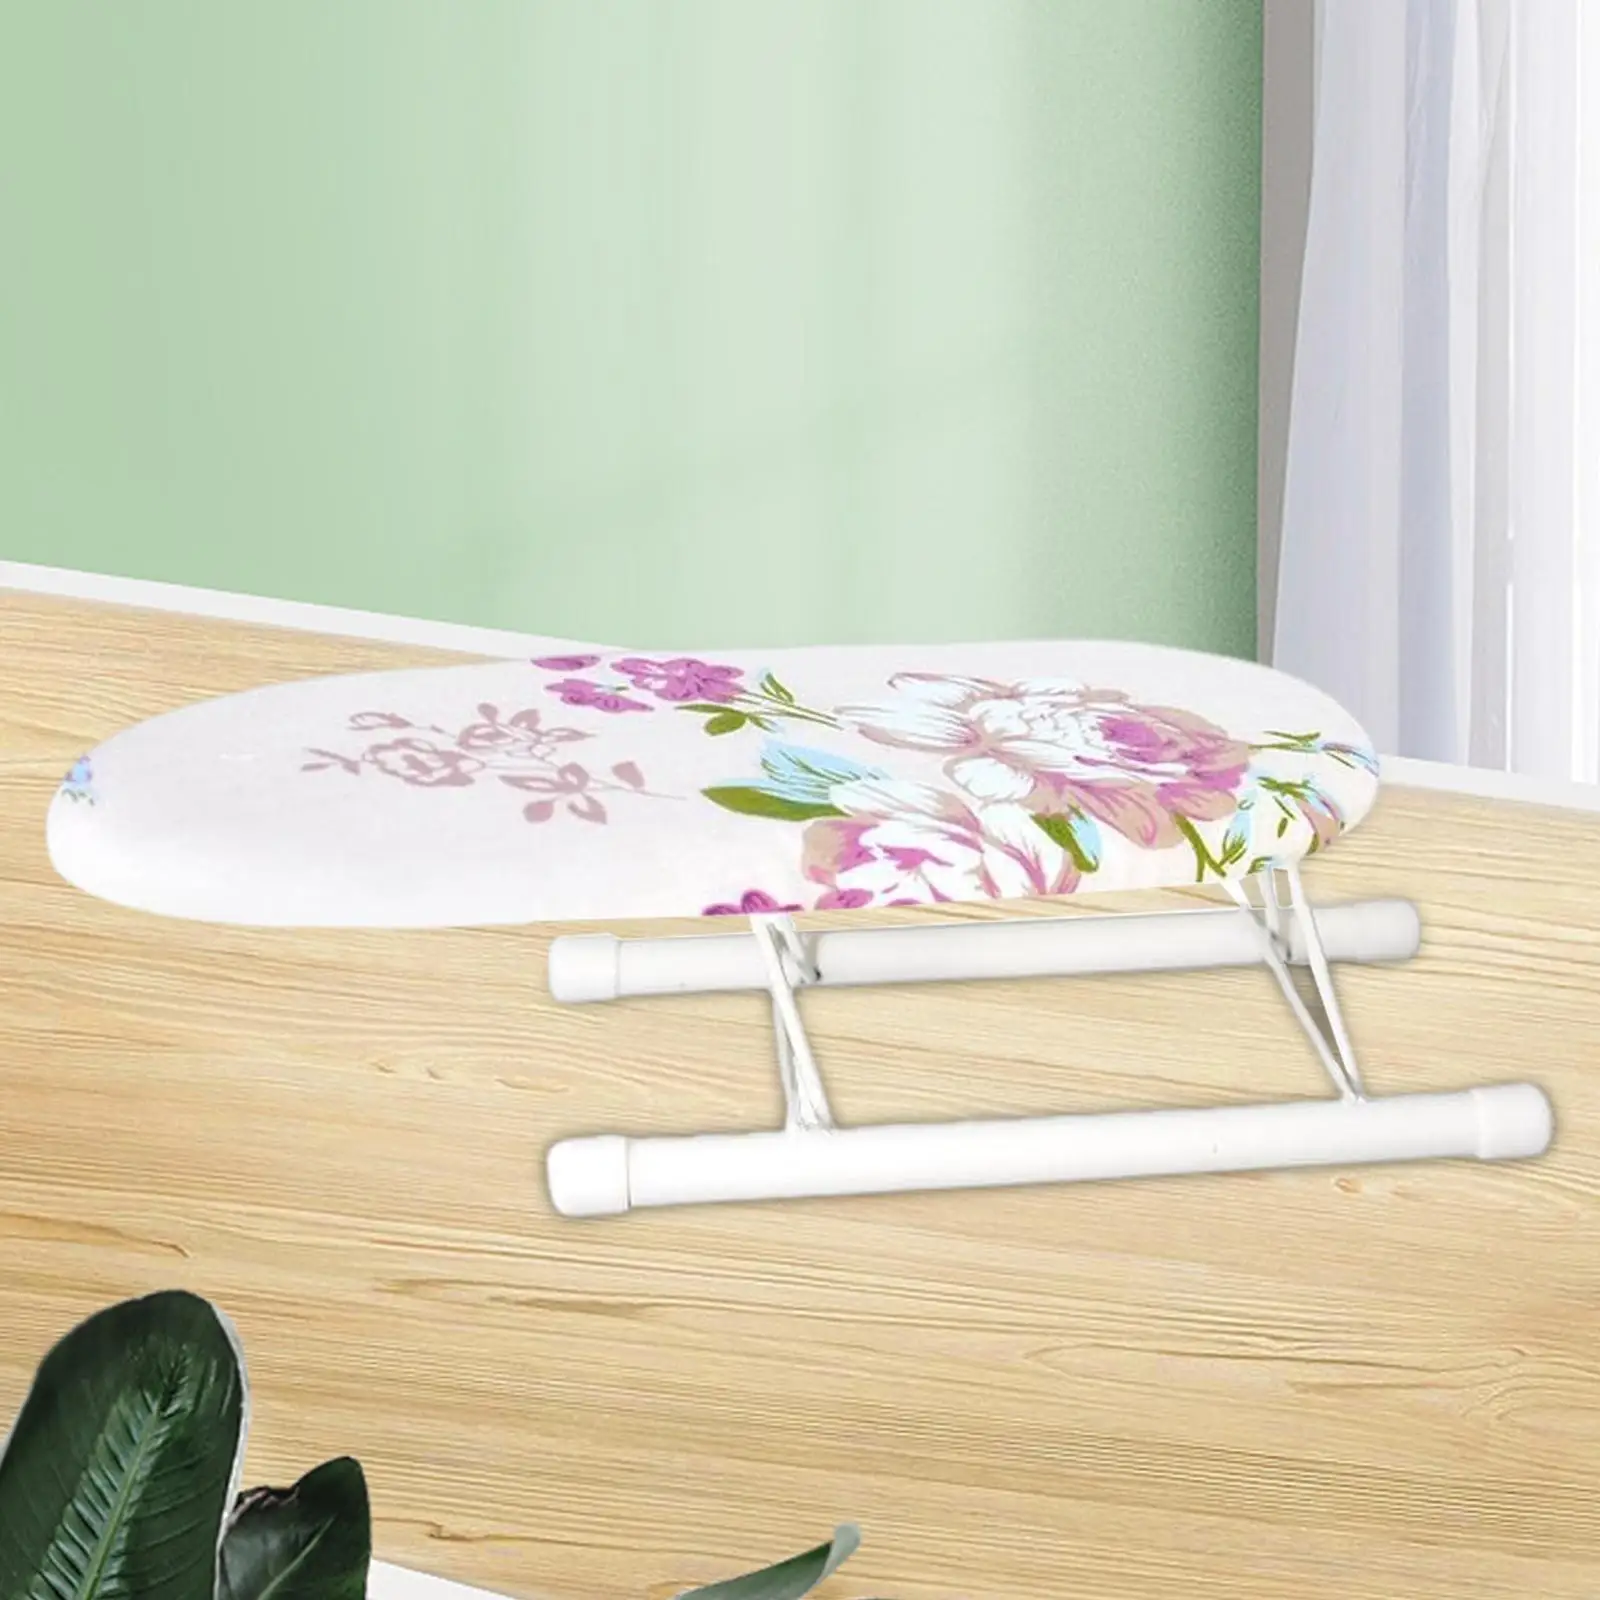 Table Top Ironing Board Foldable Sleeve Cuffs Collars Washable Removable for Sewing Room Dorm Household Home Apartment